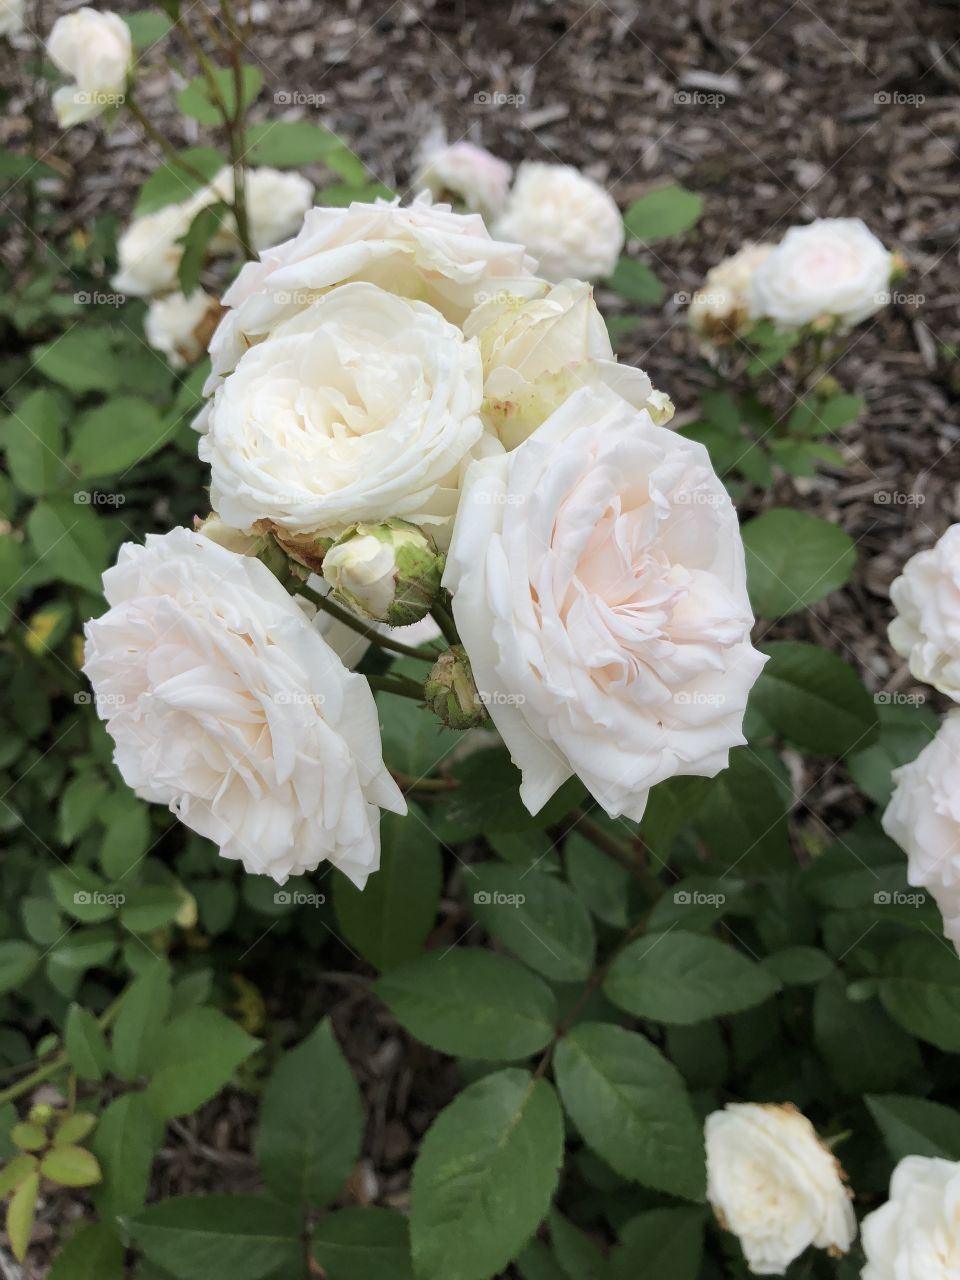 A stunning bouquet of white roses. Picture taken at the rose garden in Colonial Park in Somerset, NJ. 